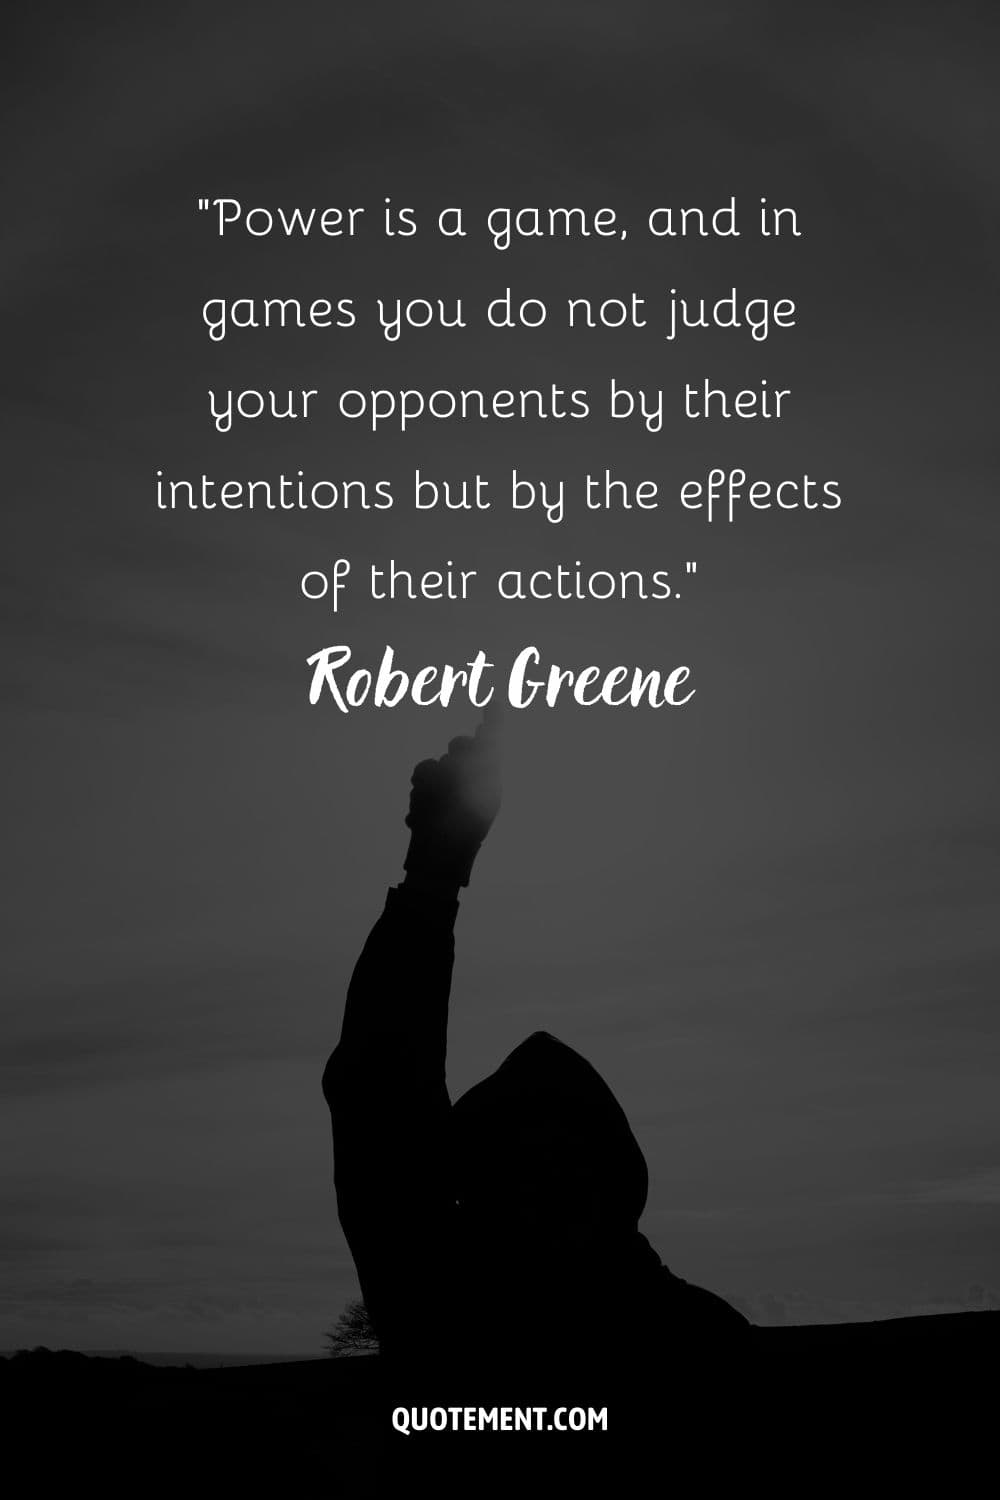 “Power is a game, and in games you do not judge your opponents by their intentions but by the effects of their actions.” ― Robert Greene, The 48 Laws of Power